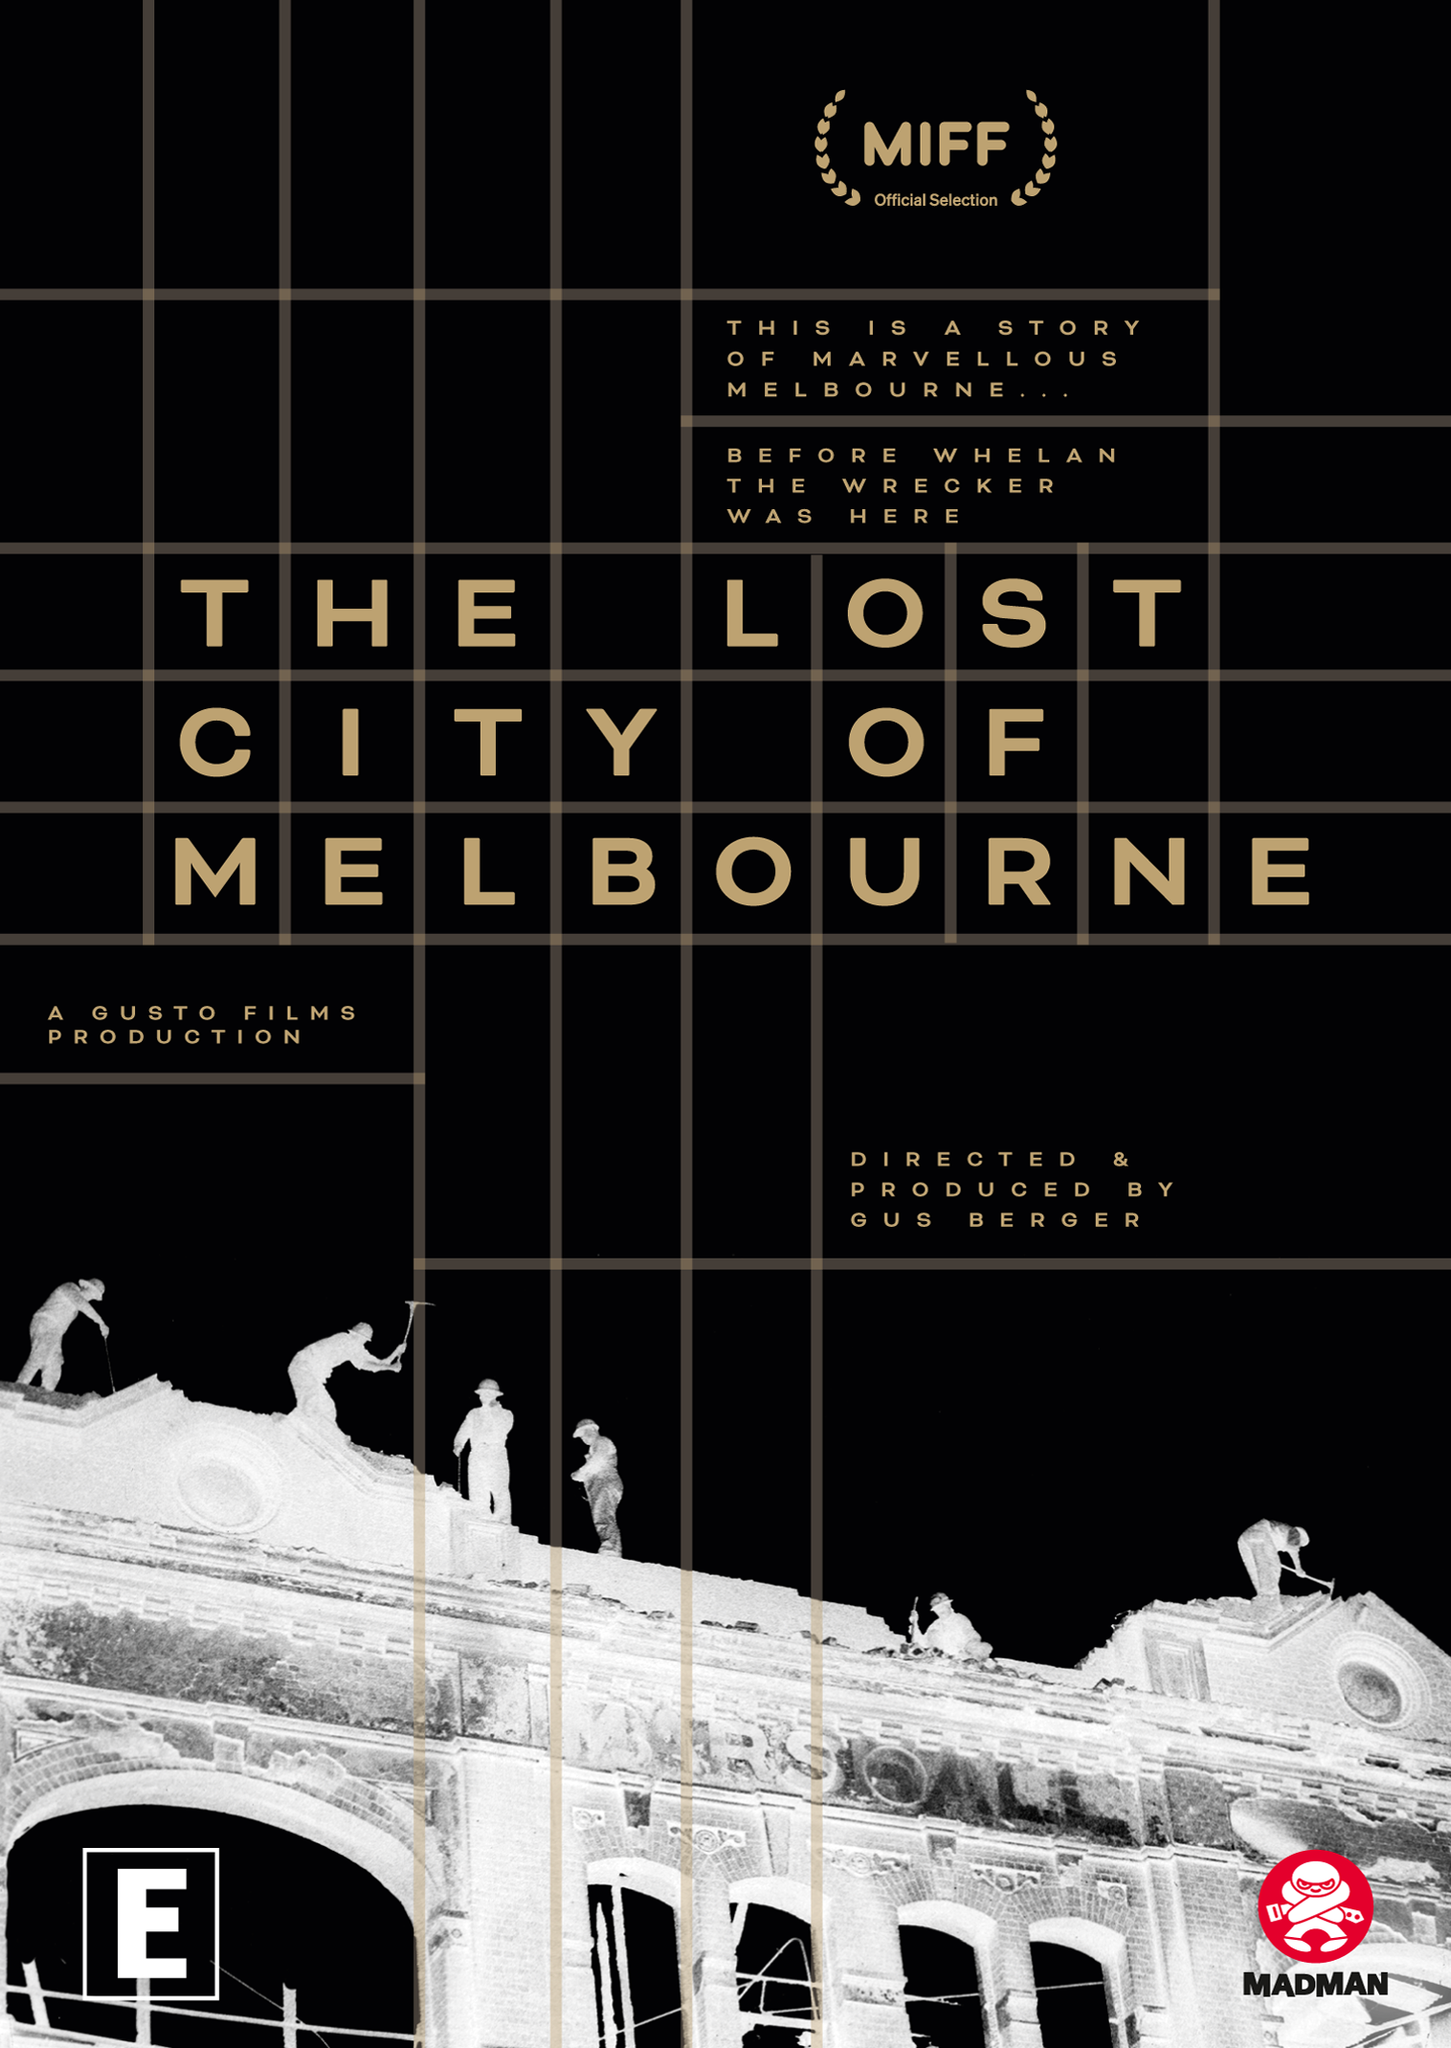 THE LOST CITY OF MELBOURNE